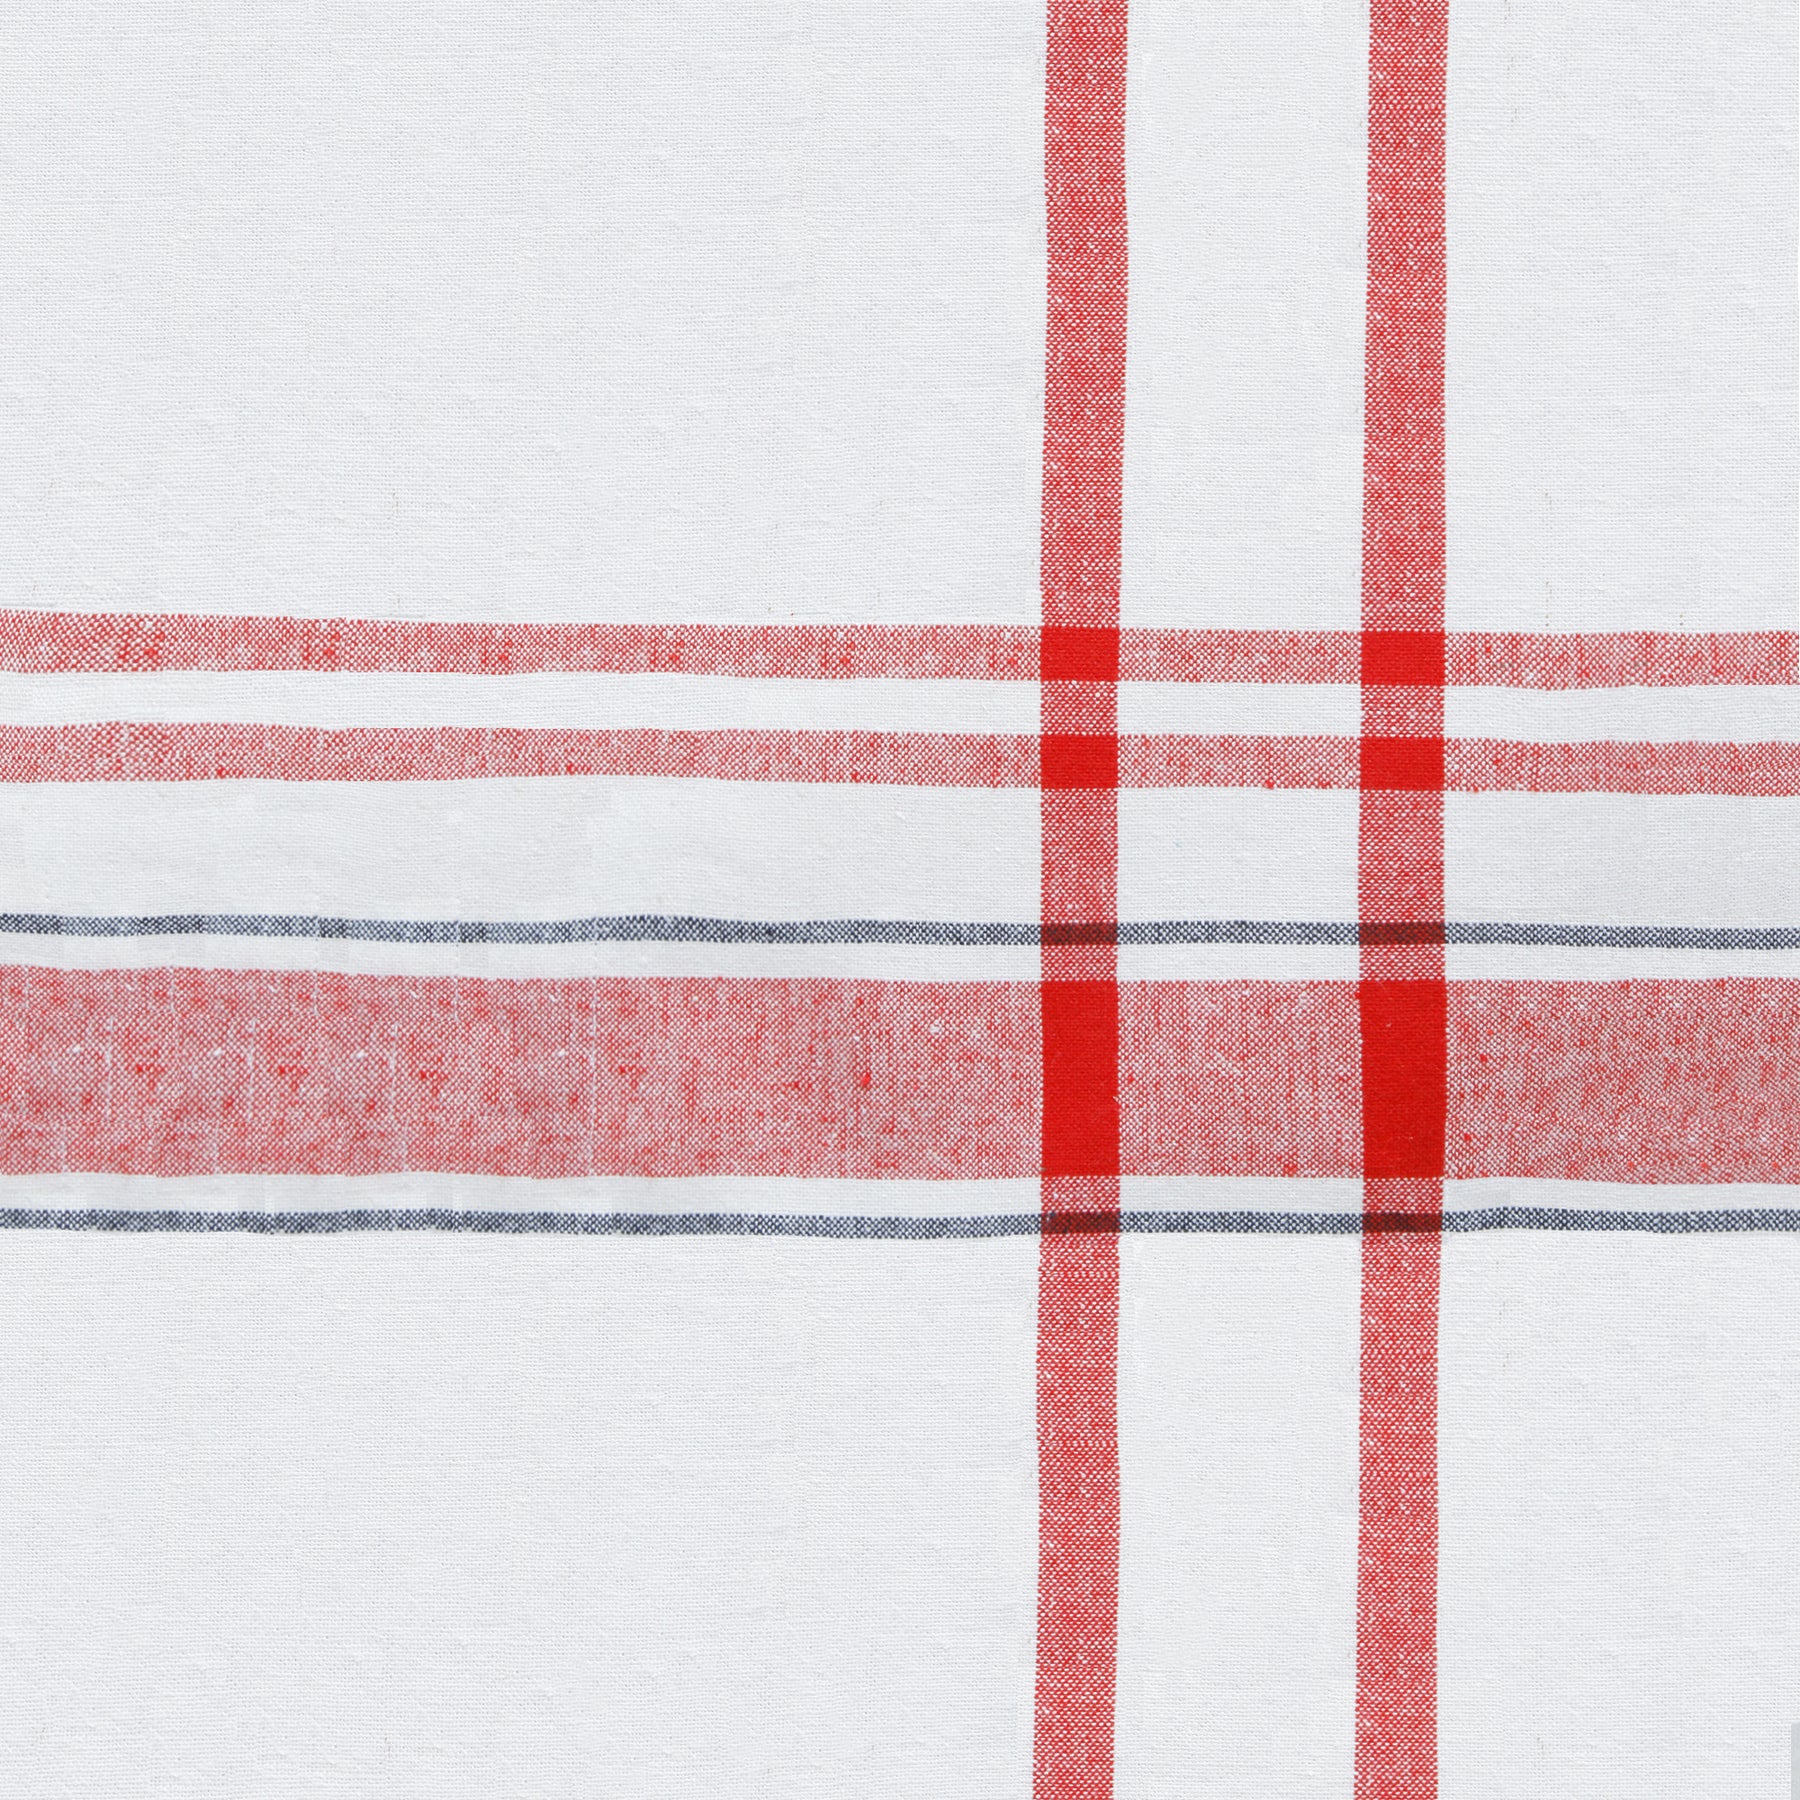 French tablecloth in red and white checkered pattern on a white background